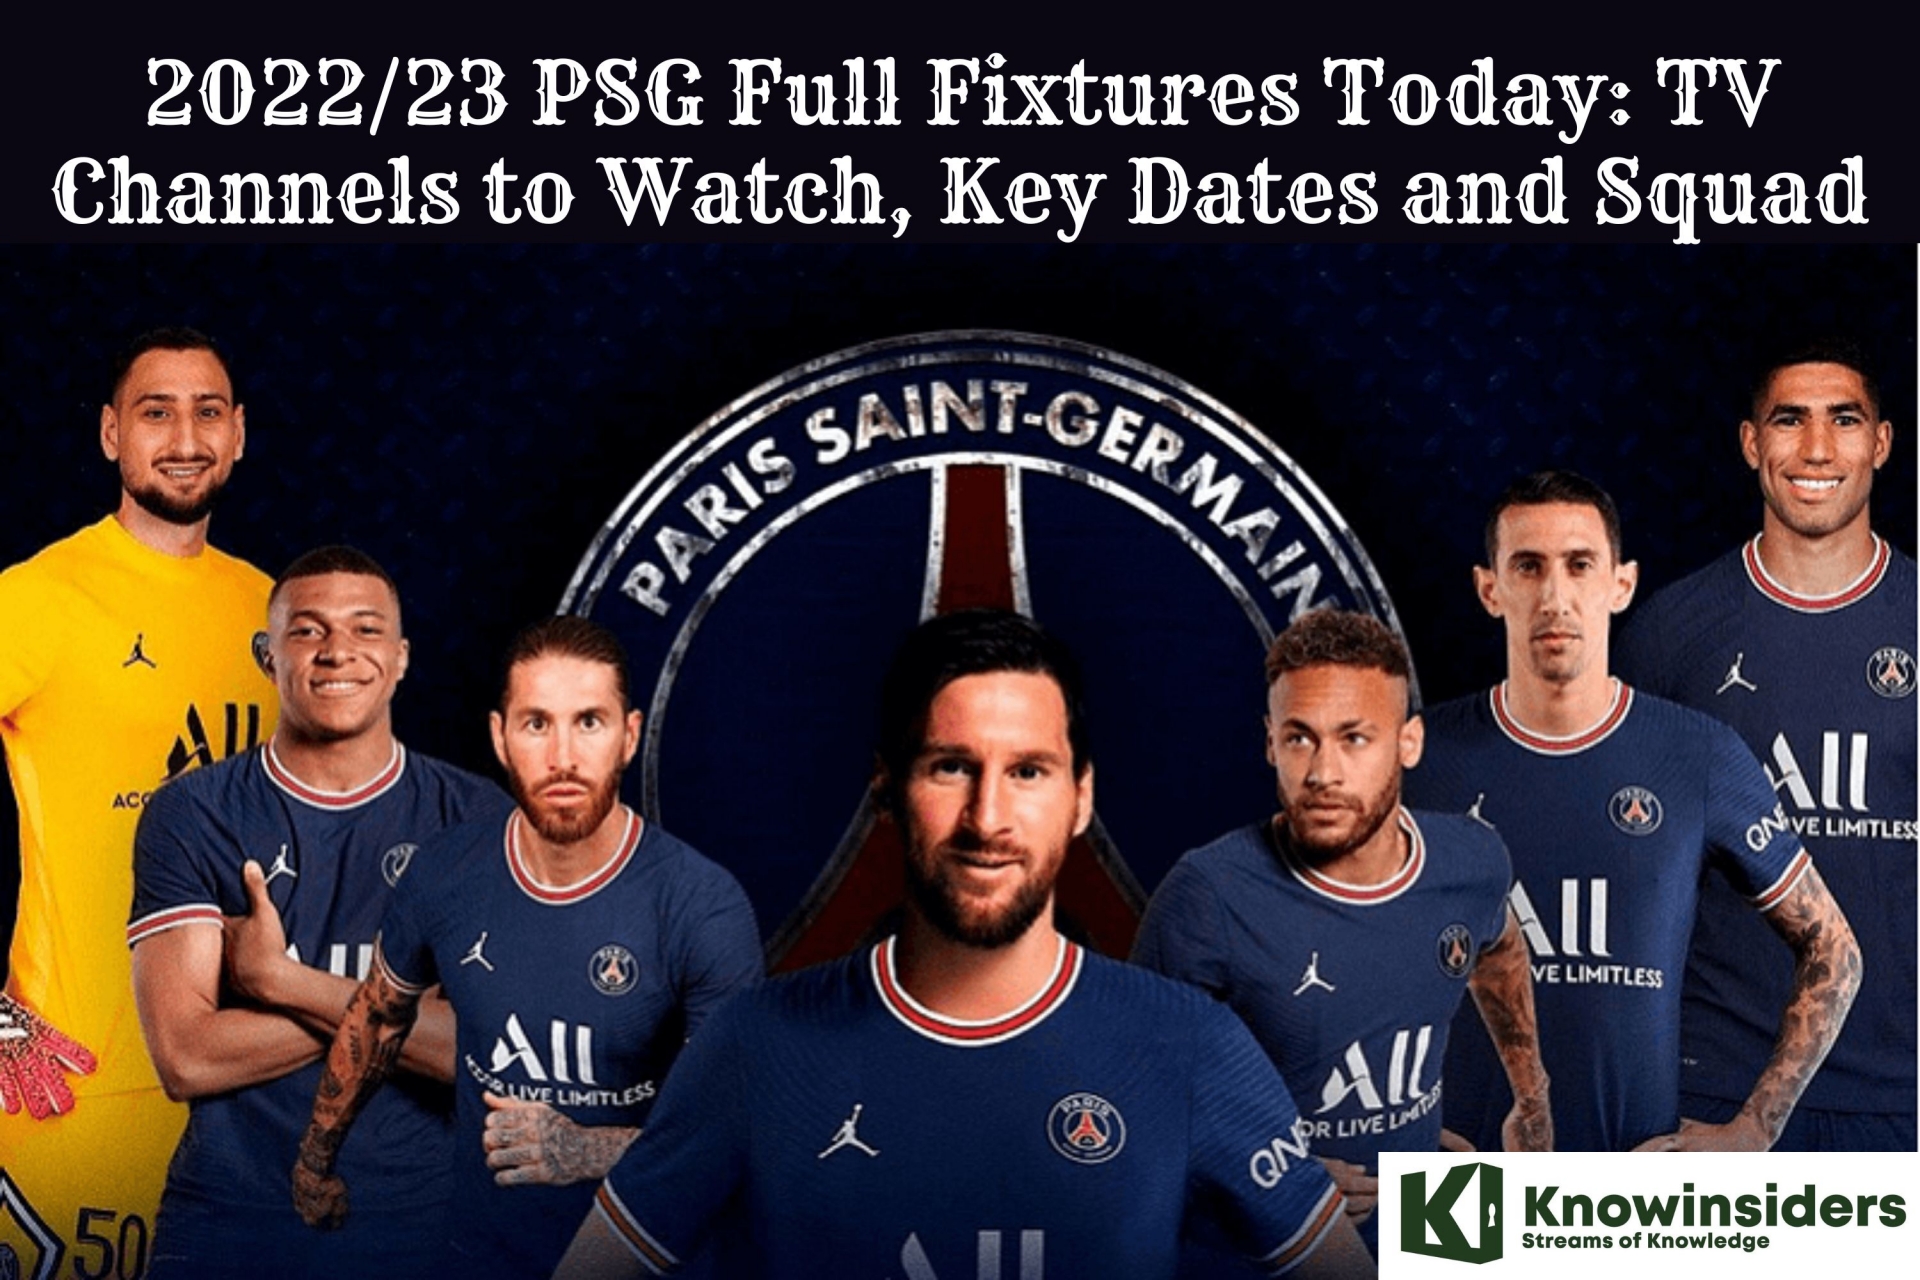 2022/23 PSG Full Fixtures Today: TV Channels to Watch, Key Dates and FAQs